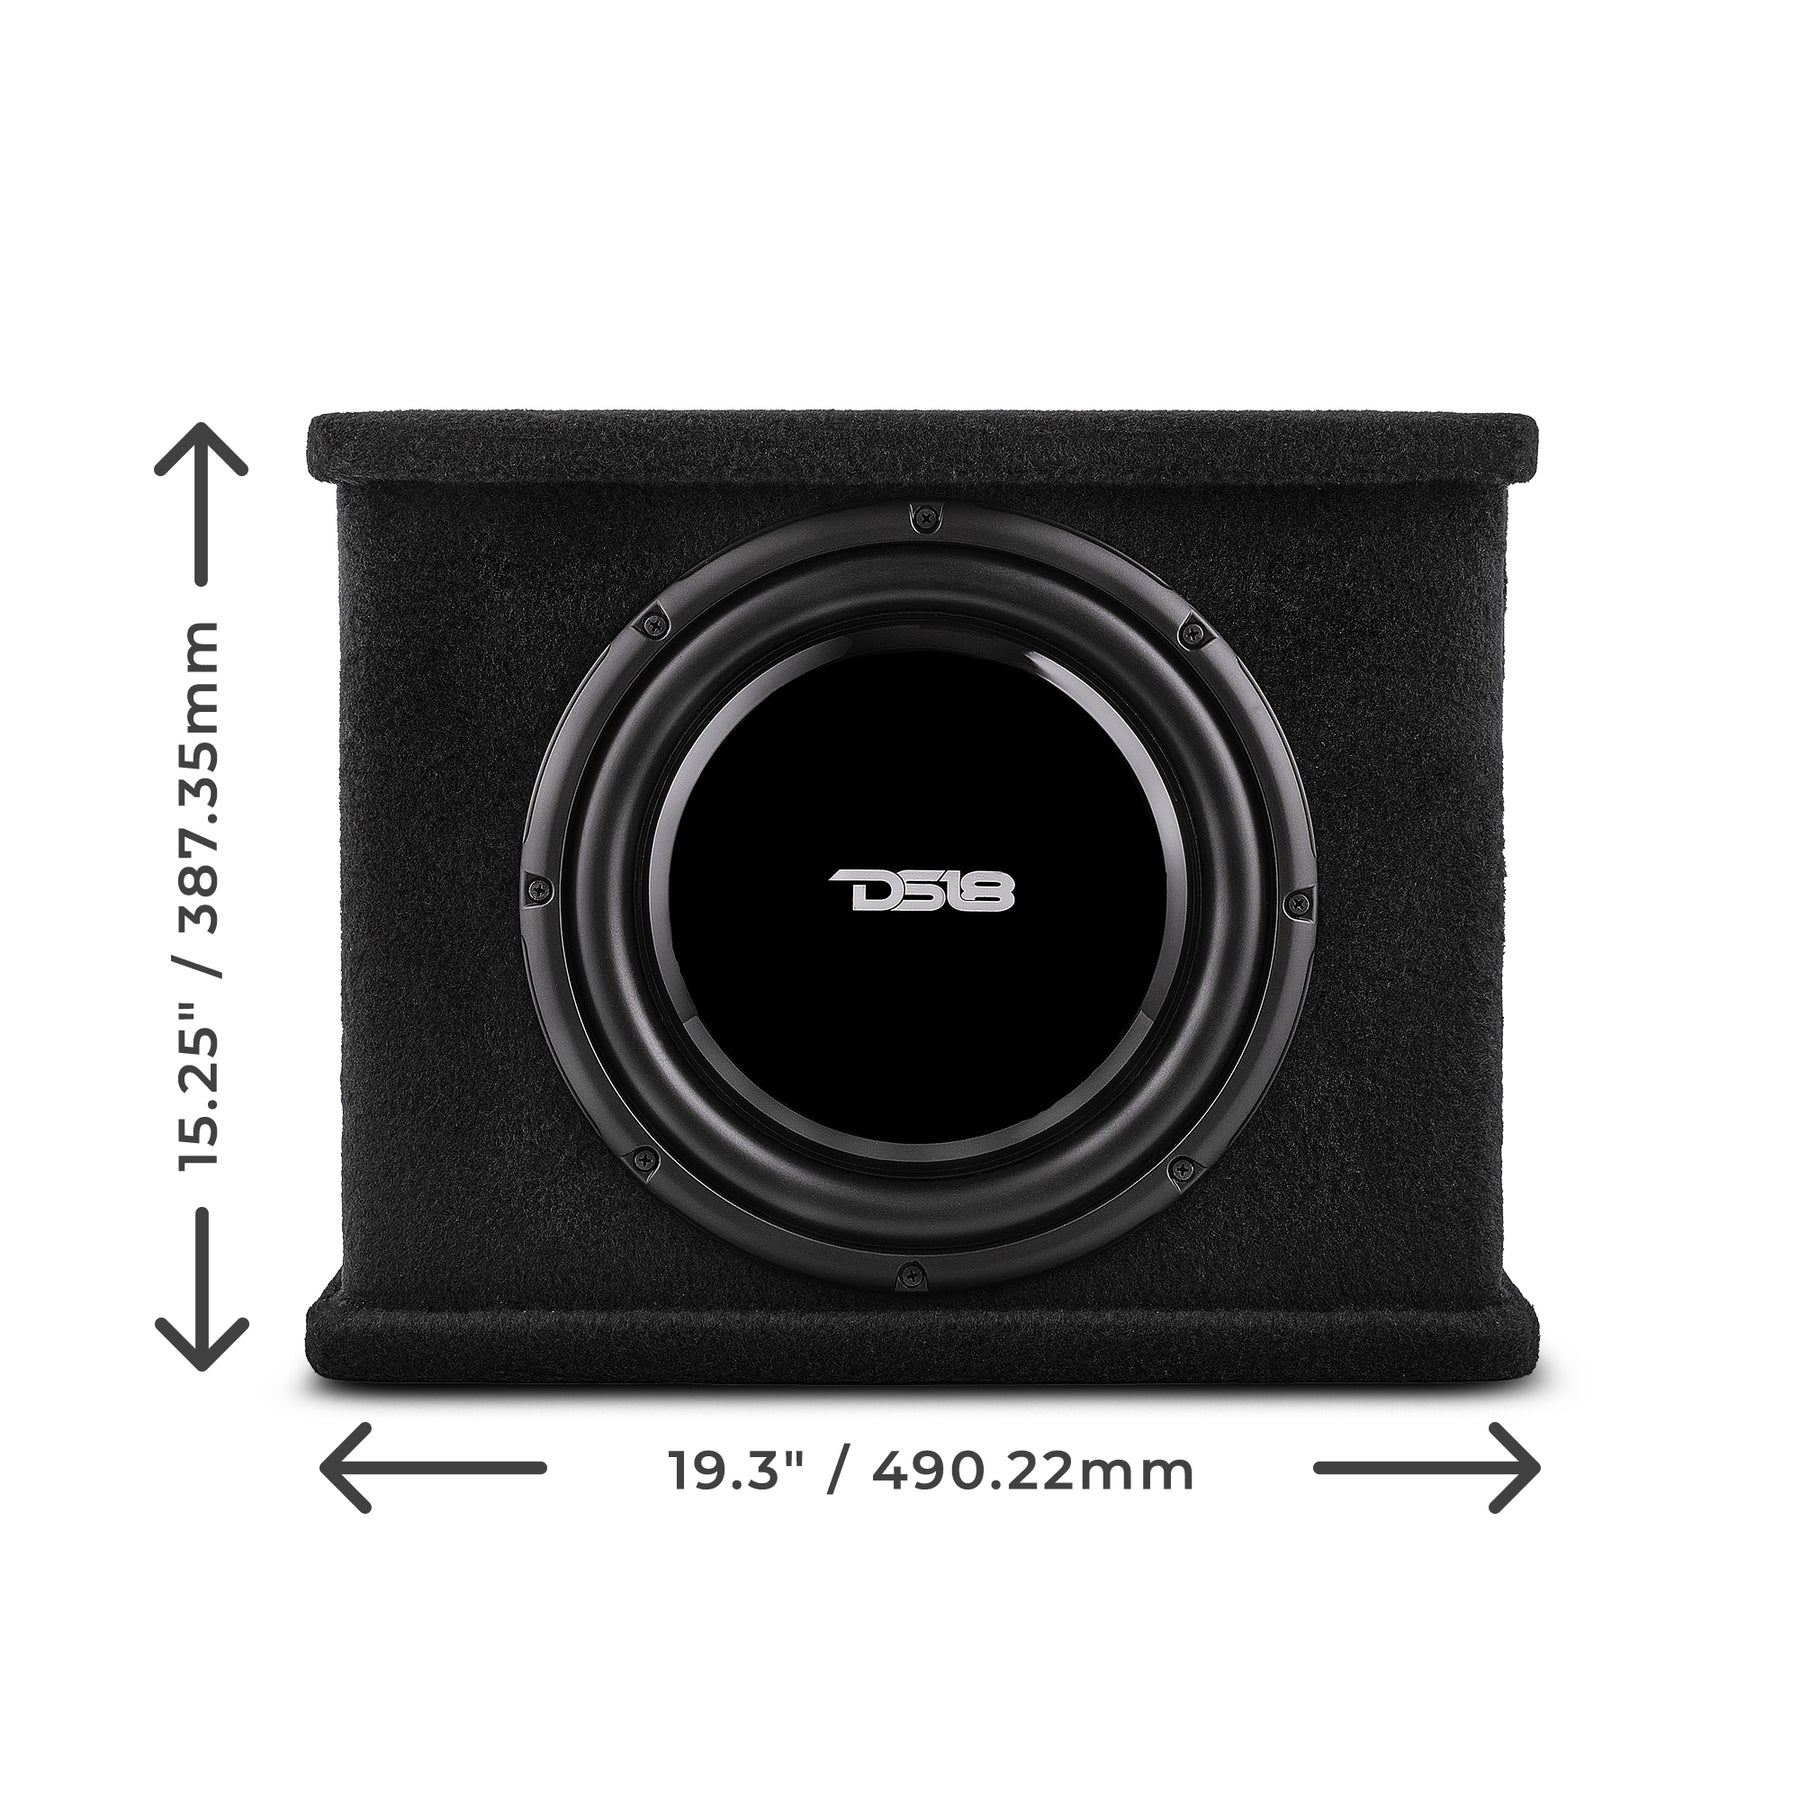 12" Loaded Shallow Subwoofer Enclosure 350 Watts Rms @ 2 ohm